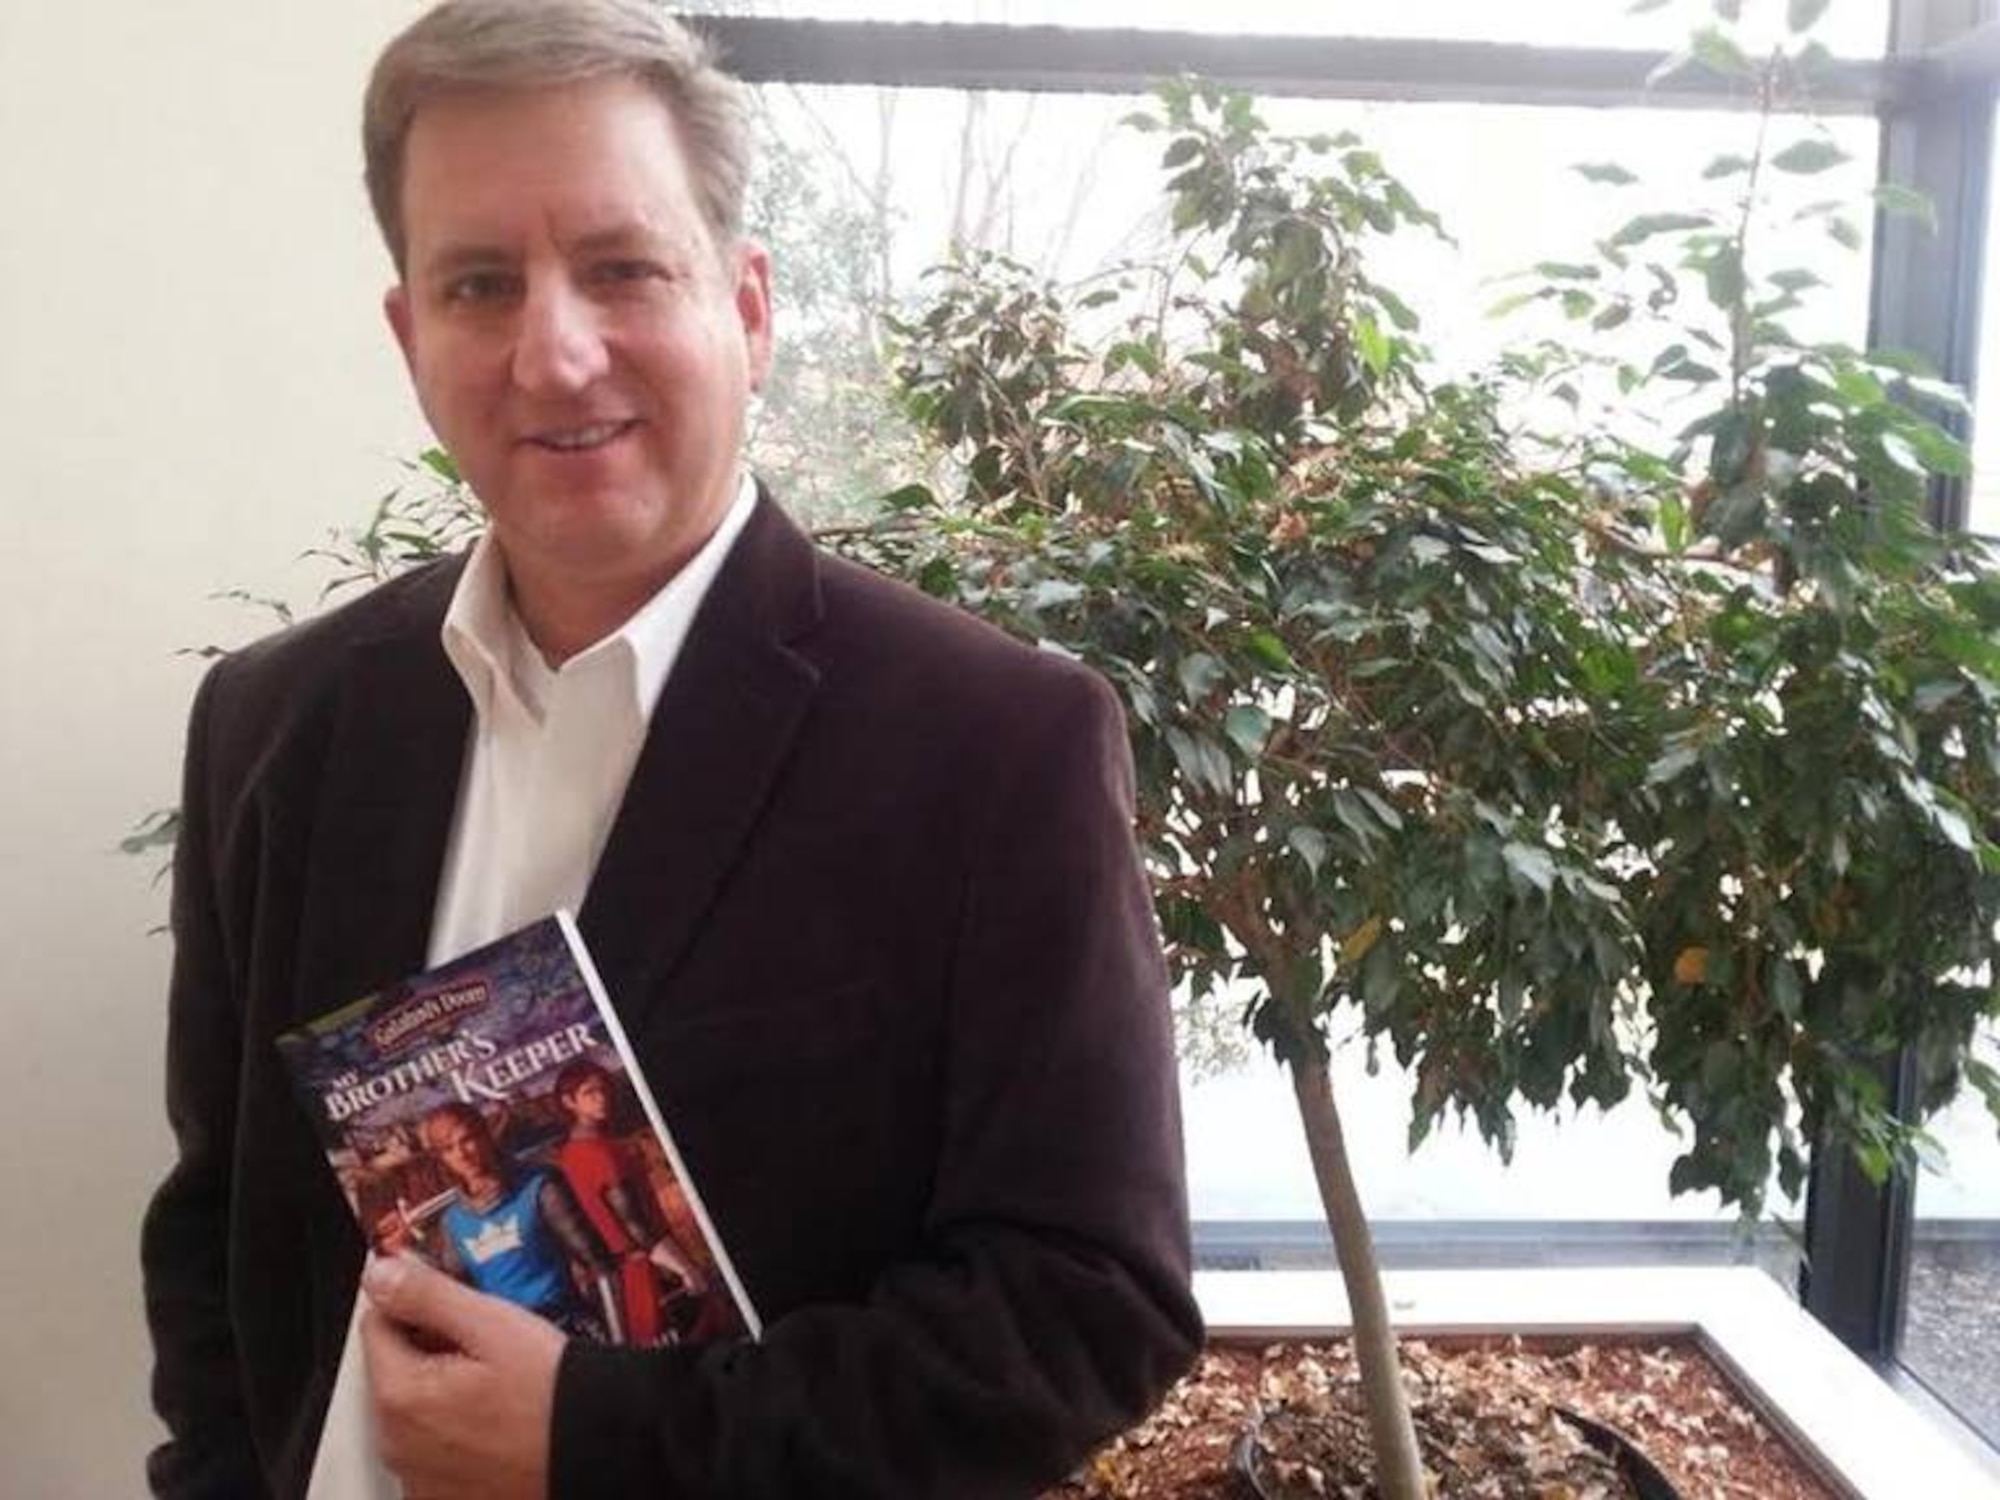 David Wright, videographer for Arnold Engineering Development Complex, pictured in October 2018 with his first book “My Brother’s Keeper,” which was published in 2014. The book is part of a series called Galahad’s Doom. The second book in the series, “Marching as to War,” came out in 2018. Wright is currently working on the third and final book, which will be called “The Armor of God.” (Courtesy photo)